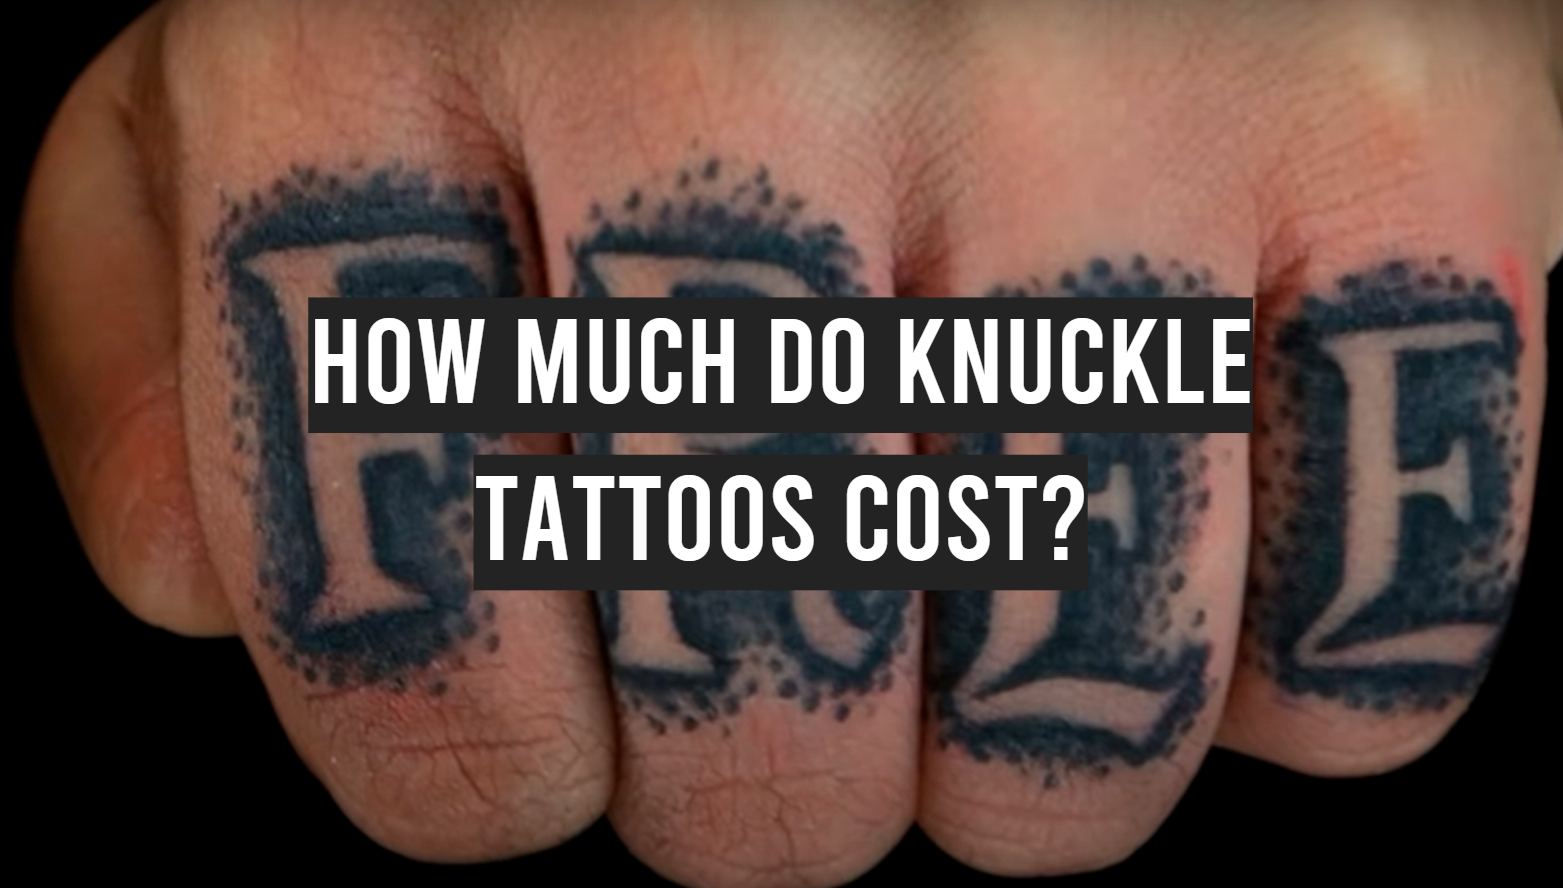 How Much Do Knuckle Tattoos Cost?